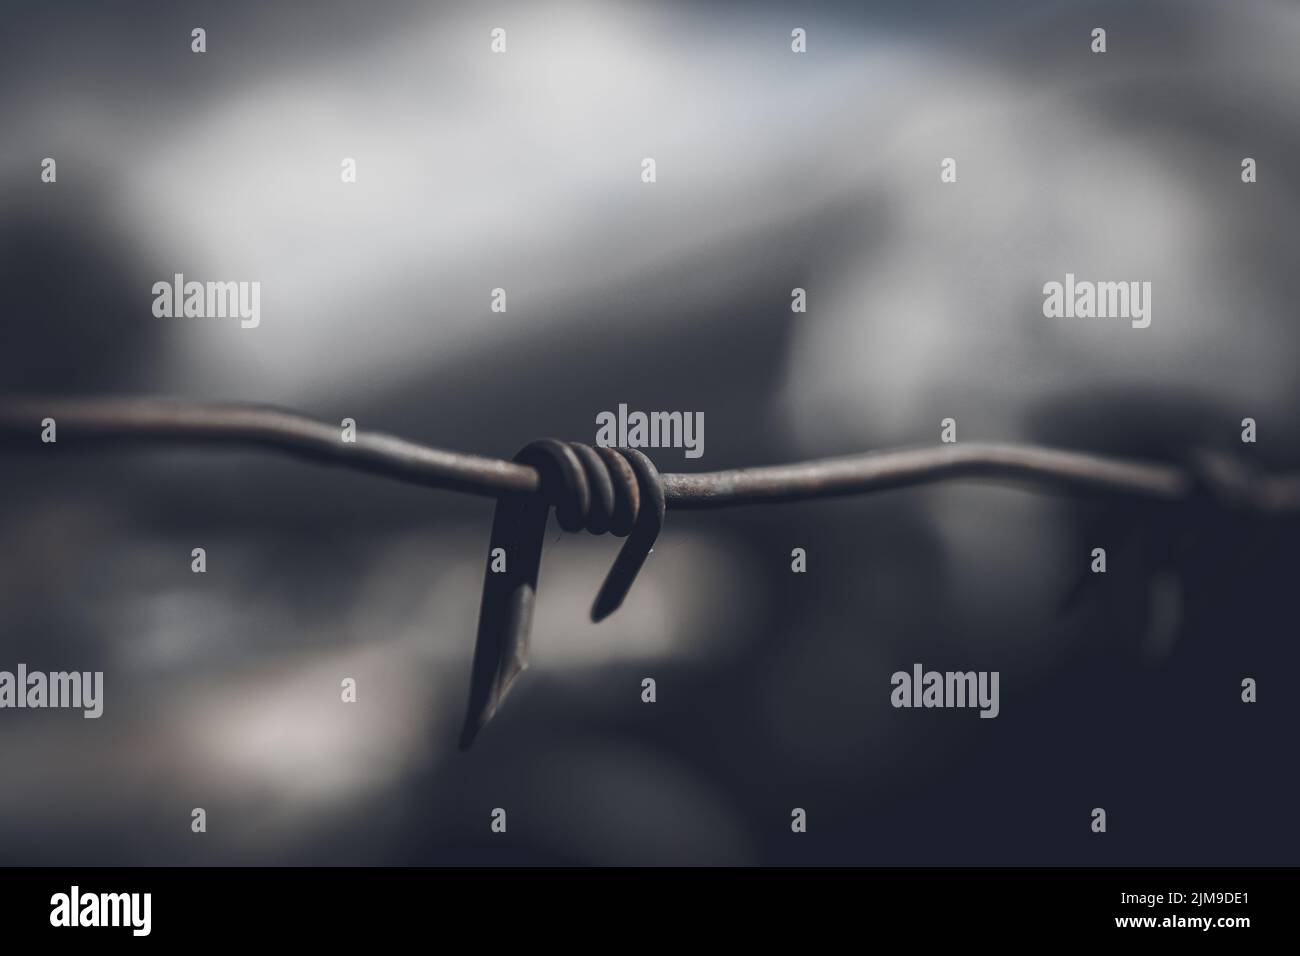 Barbed wire fence against dramatic, dark sky. Stock Photo